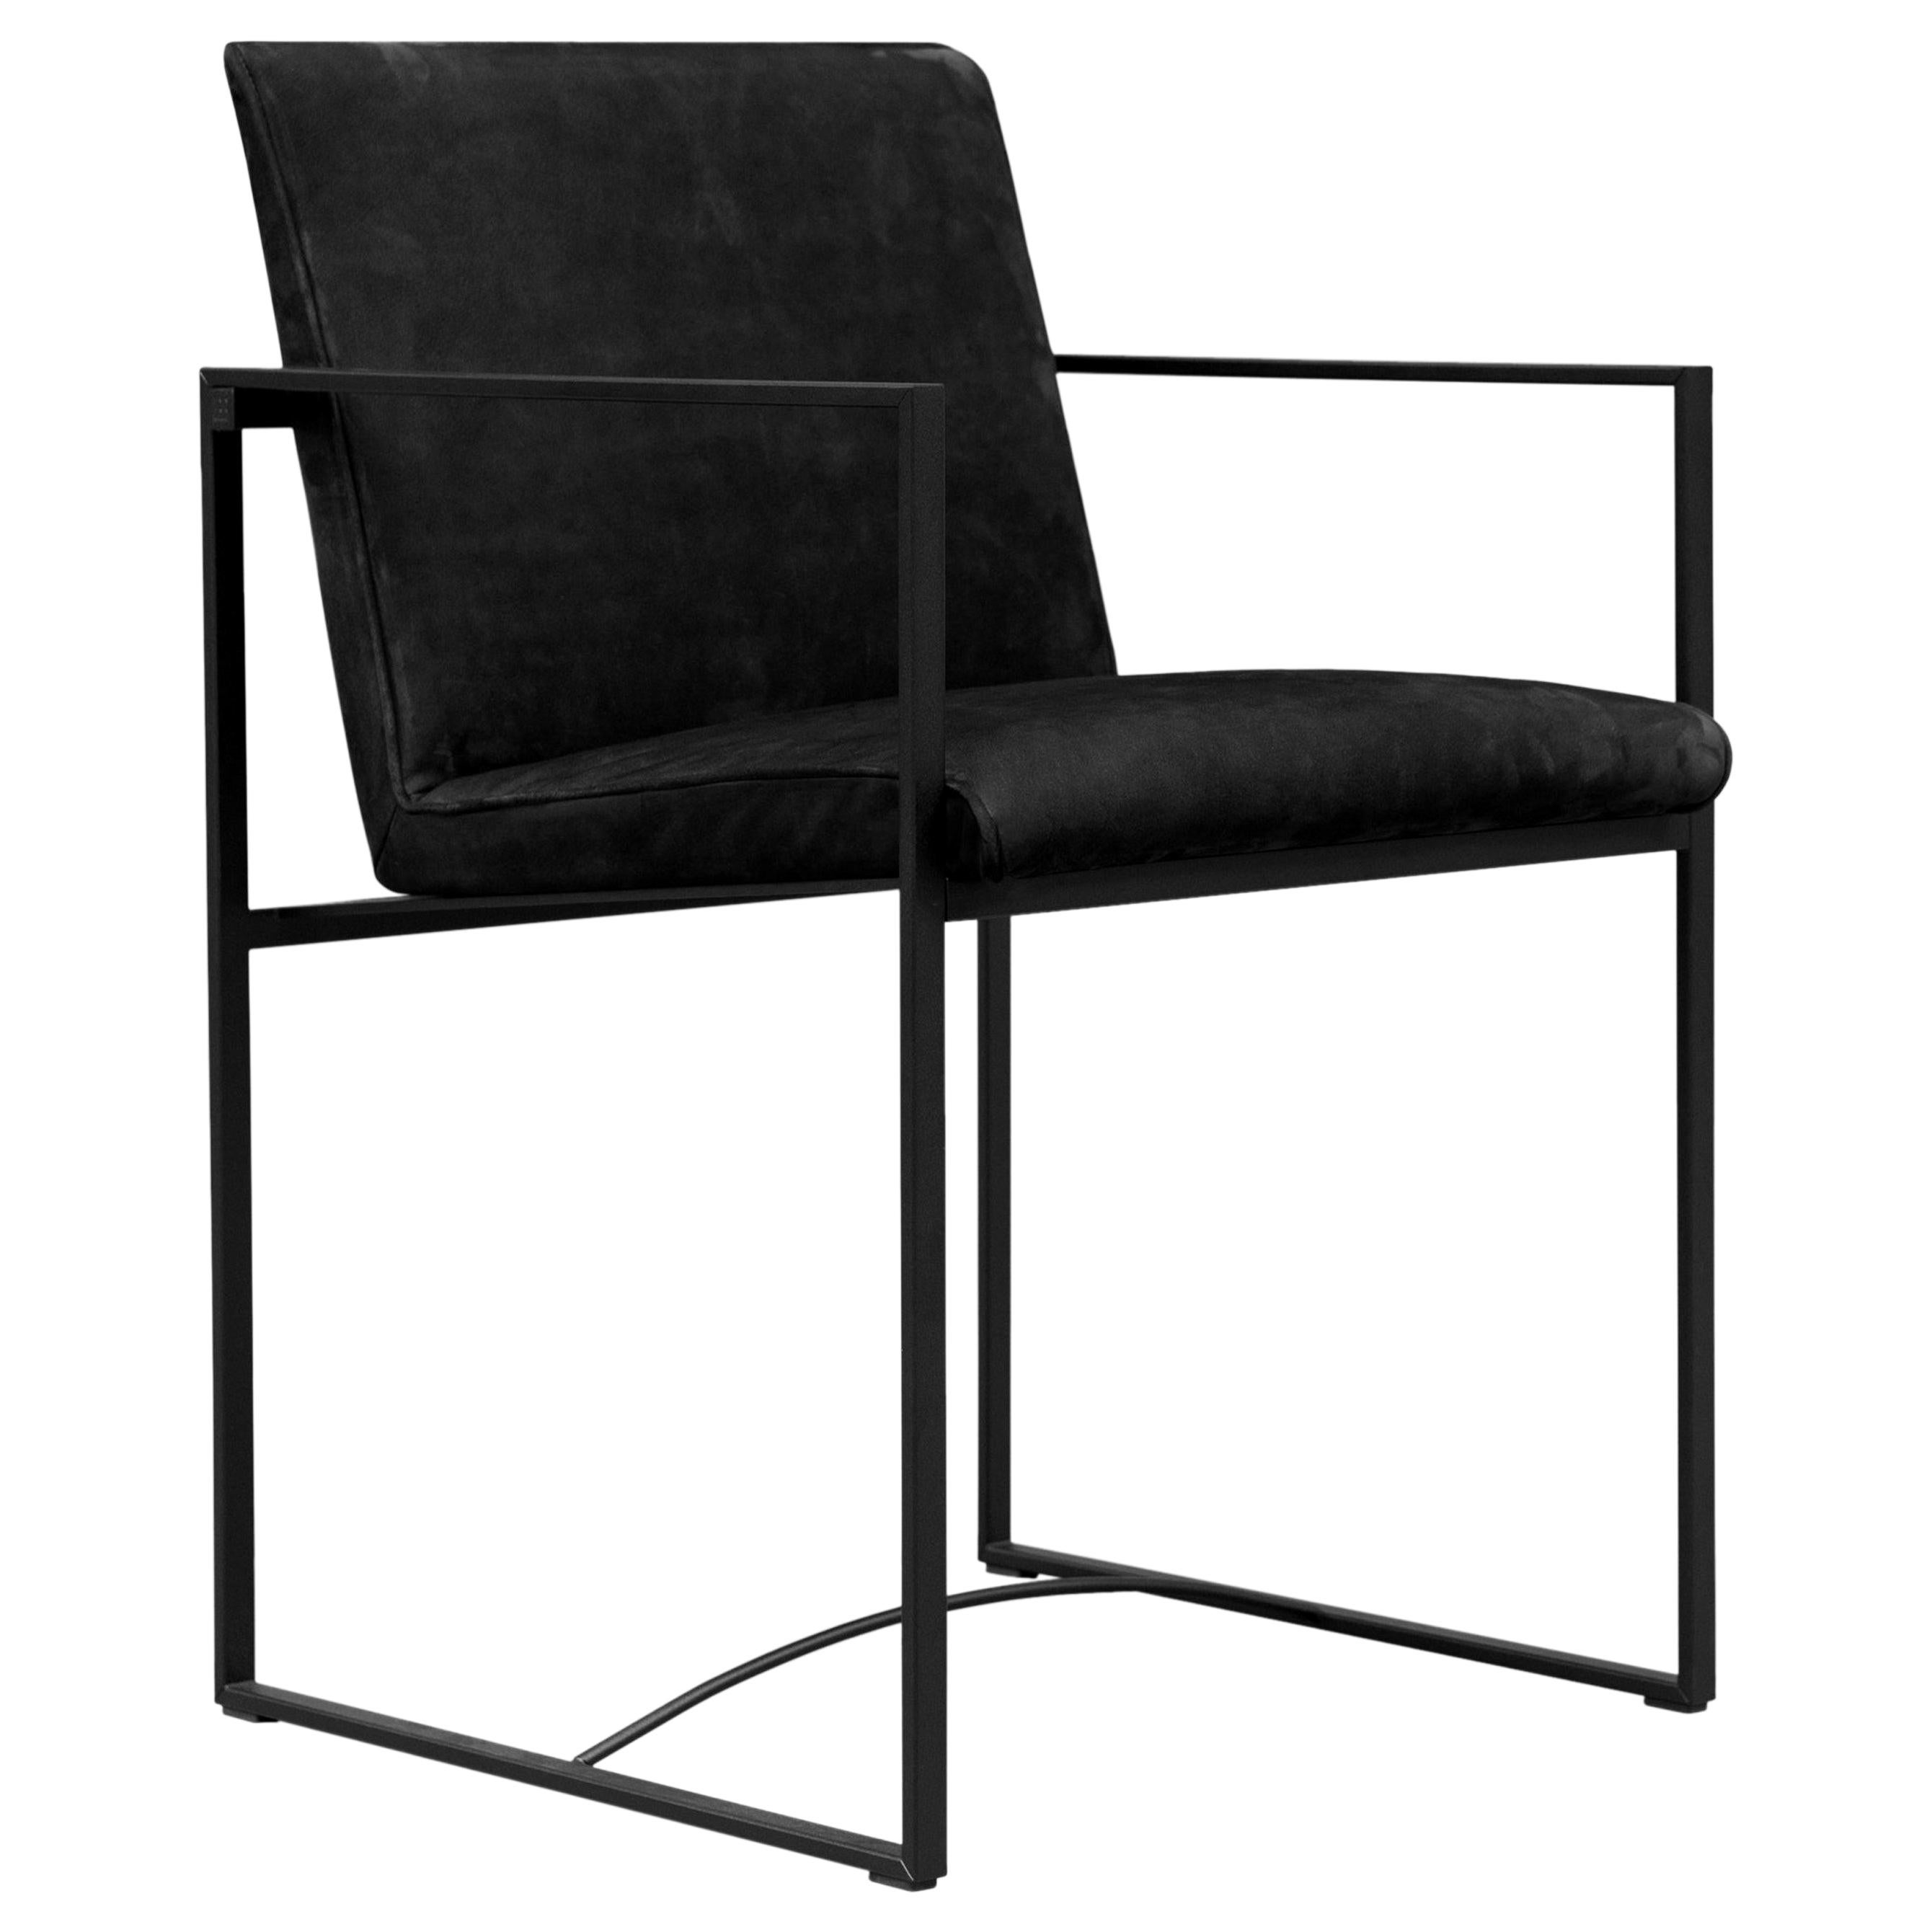 Peter Ghyczy Armchair Urban Maia 'S06+' Charcoal / Black Fabric